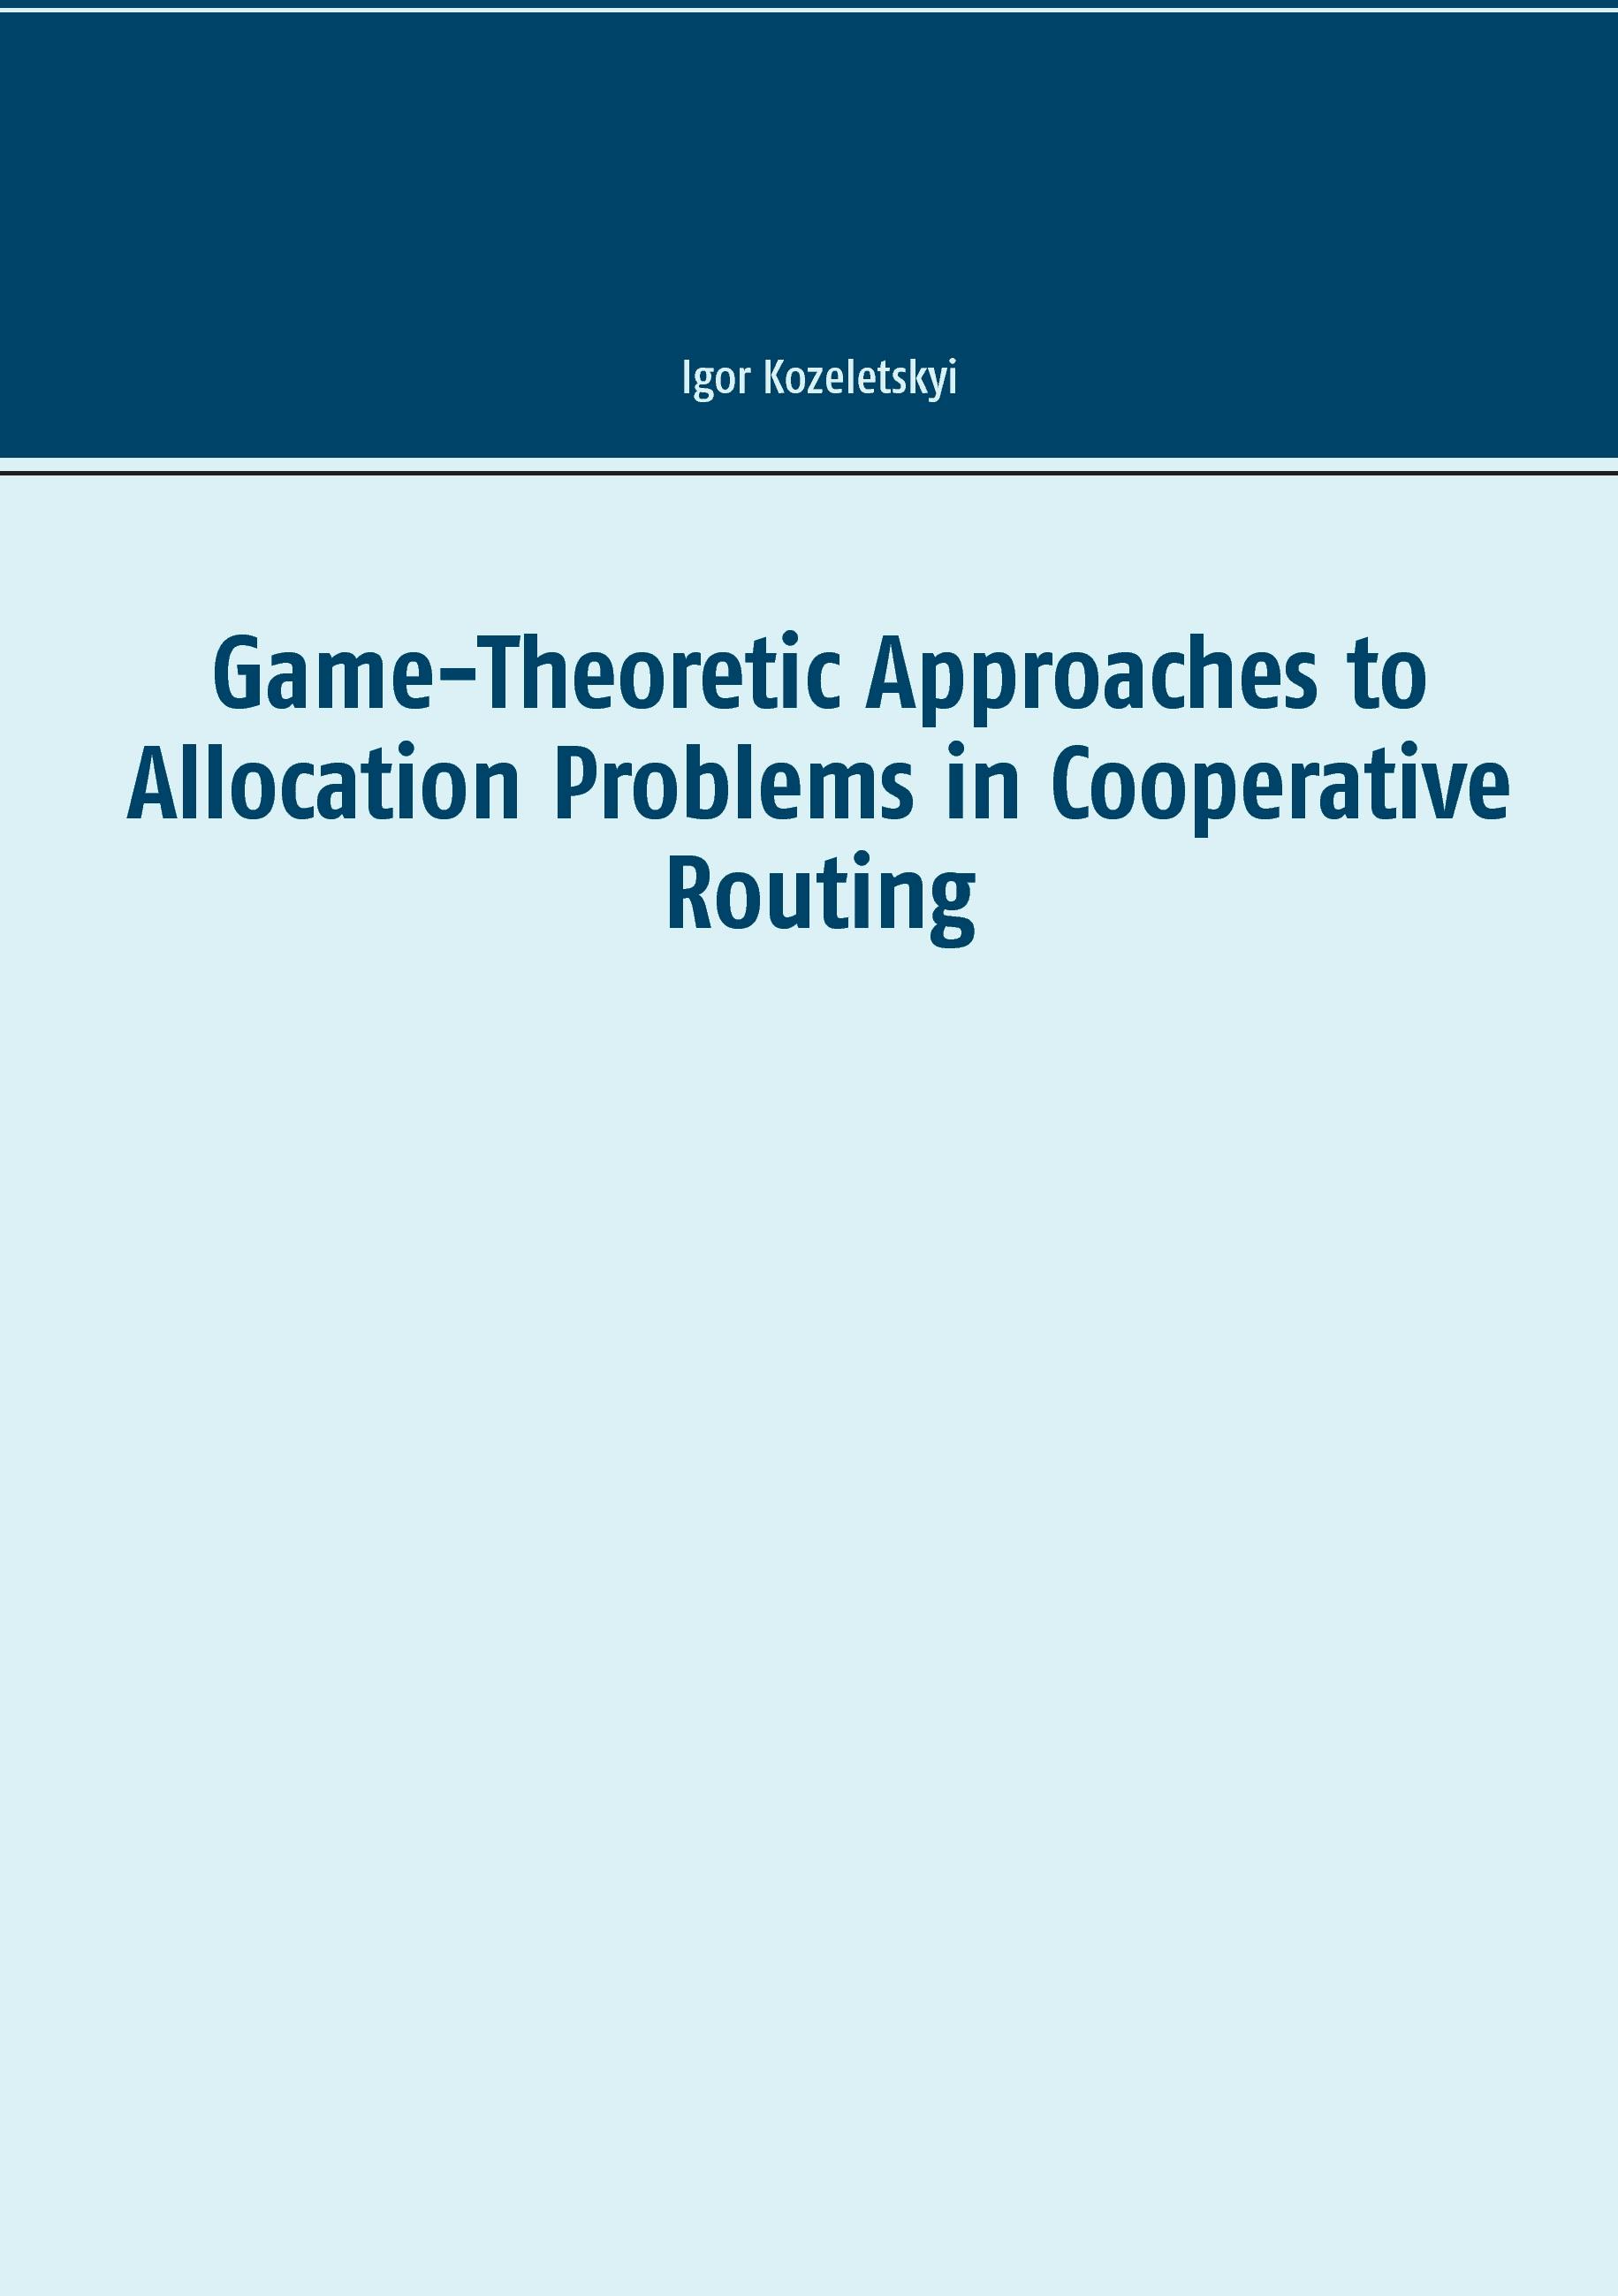 Game-Theoretic Approaches to Allocation Problems in Cooperative Routing - Igor Kozeletskyi